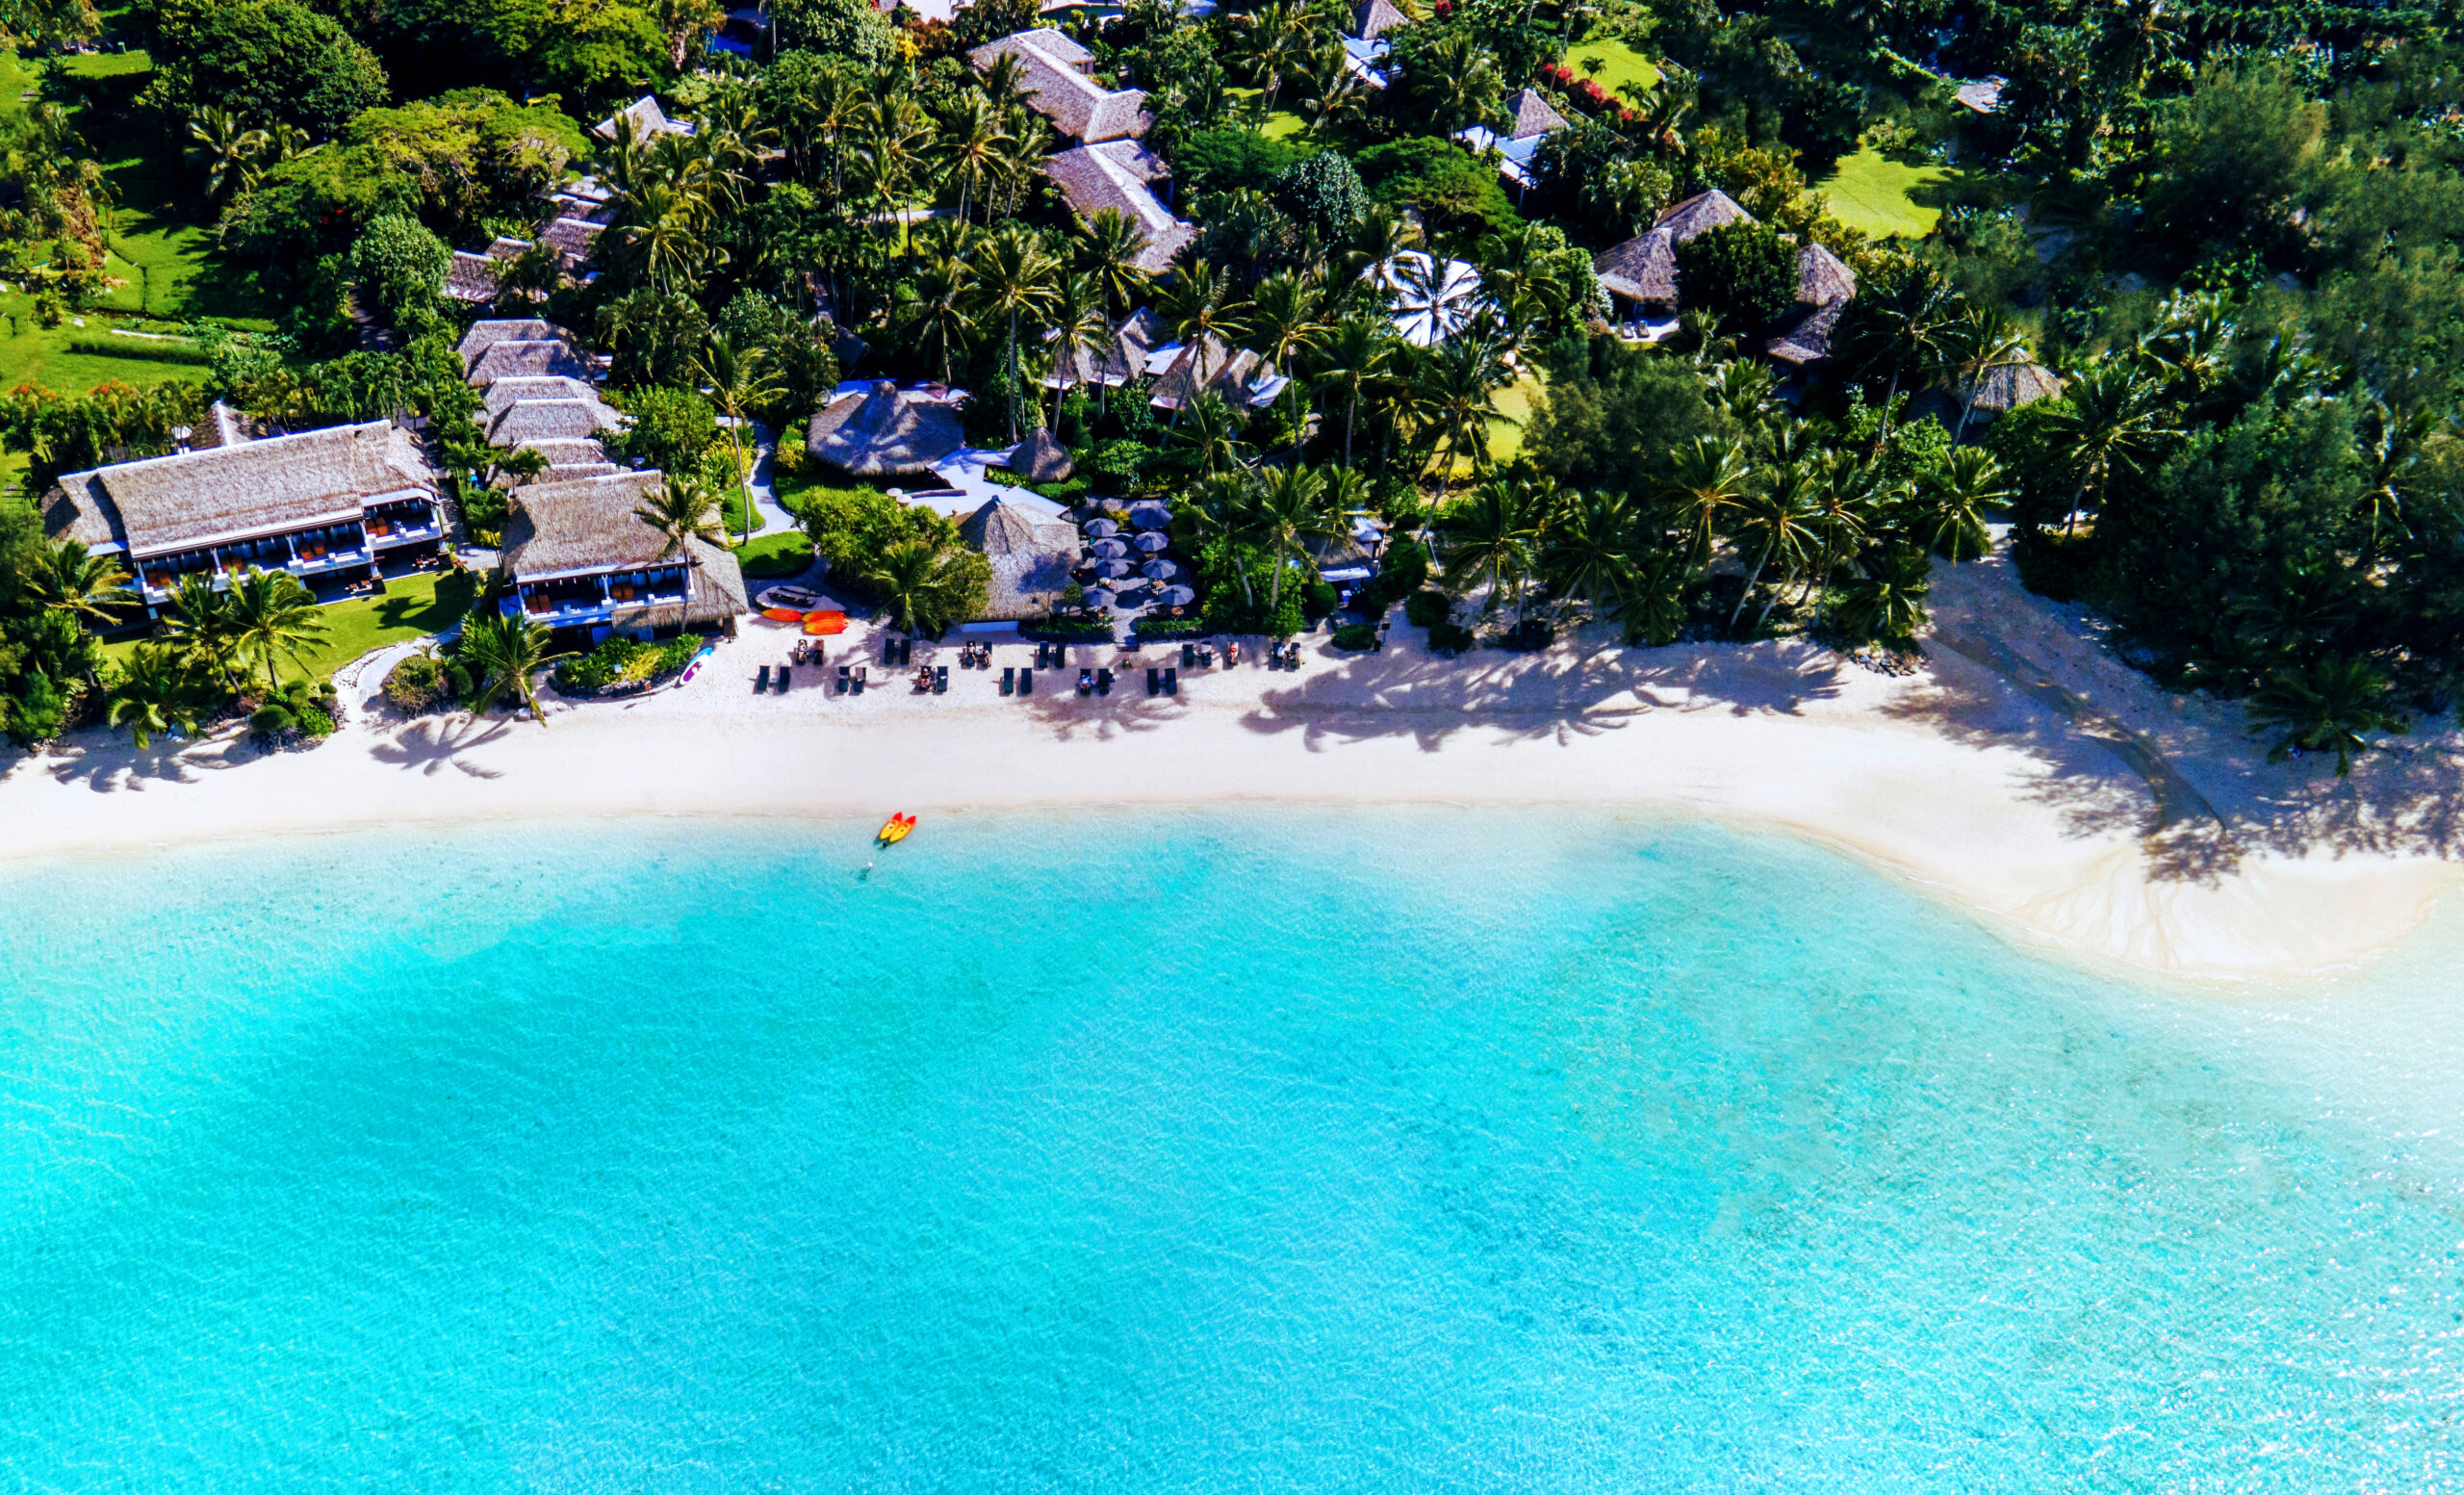 Pacific Resort Rarotonga, a family oasis in the Cook Islands